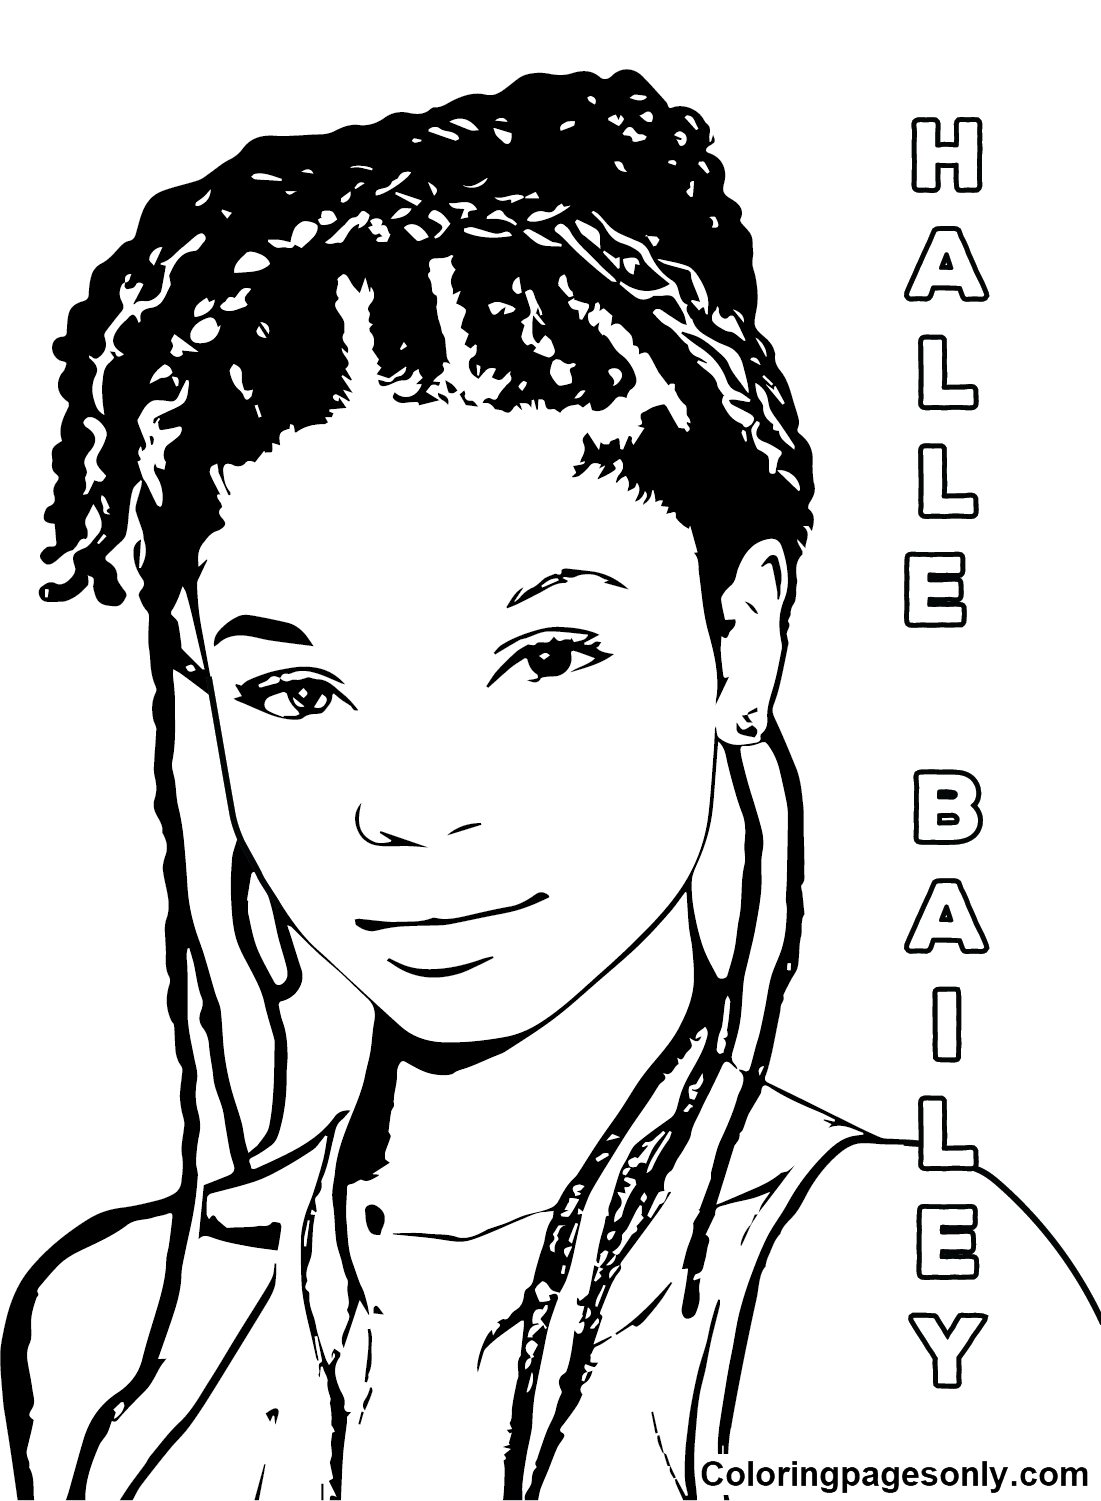 Halle Bailey Printable Coloring Pages